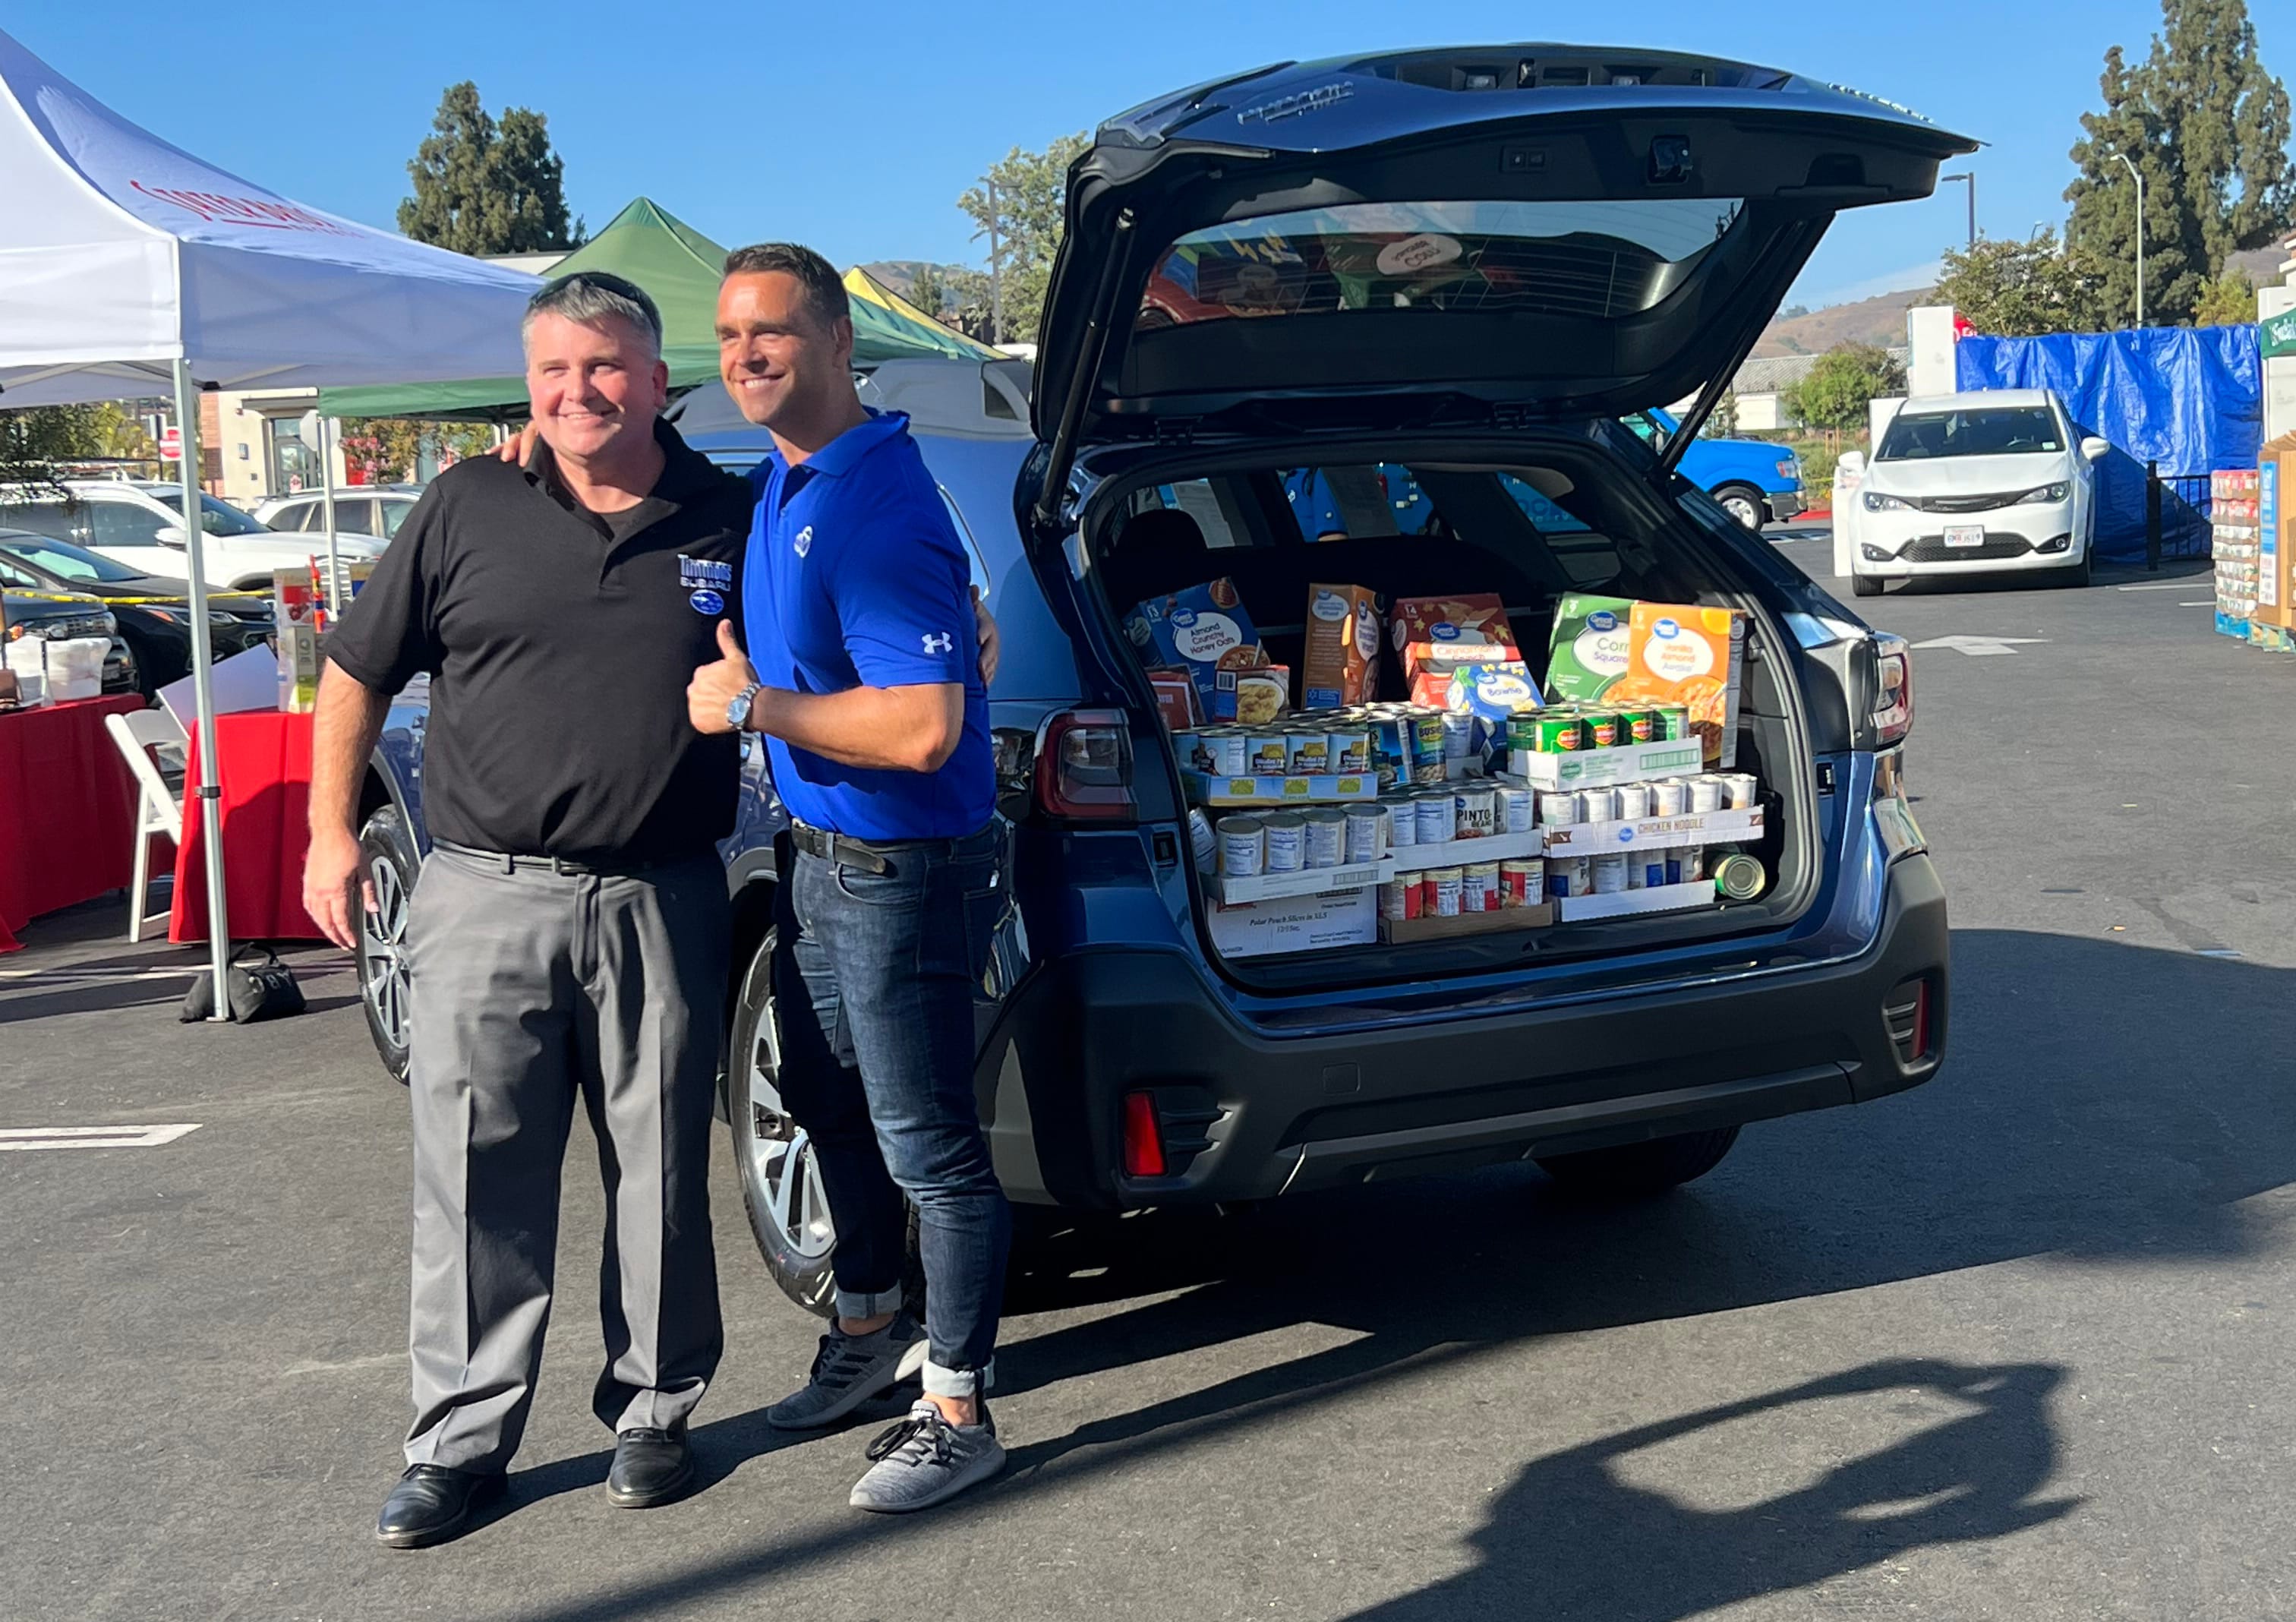 Timmons Subaru is proud to participate in the ABC7 Feed SoCal Food Drive